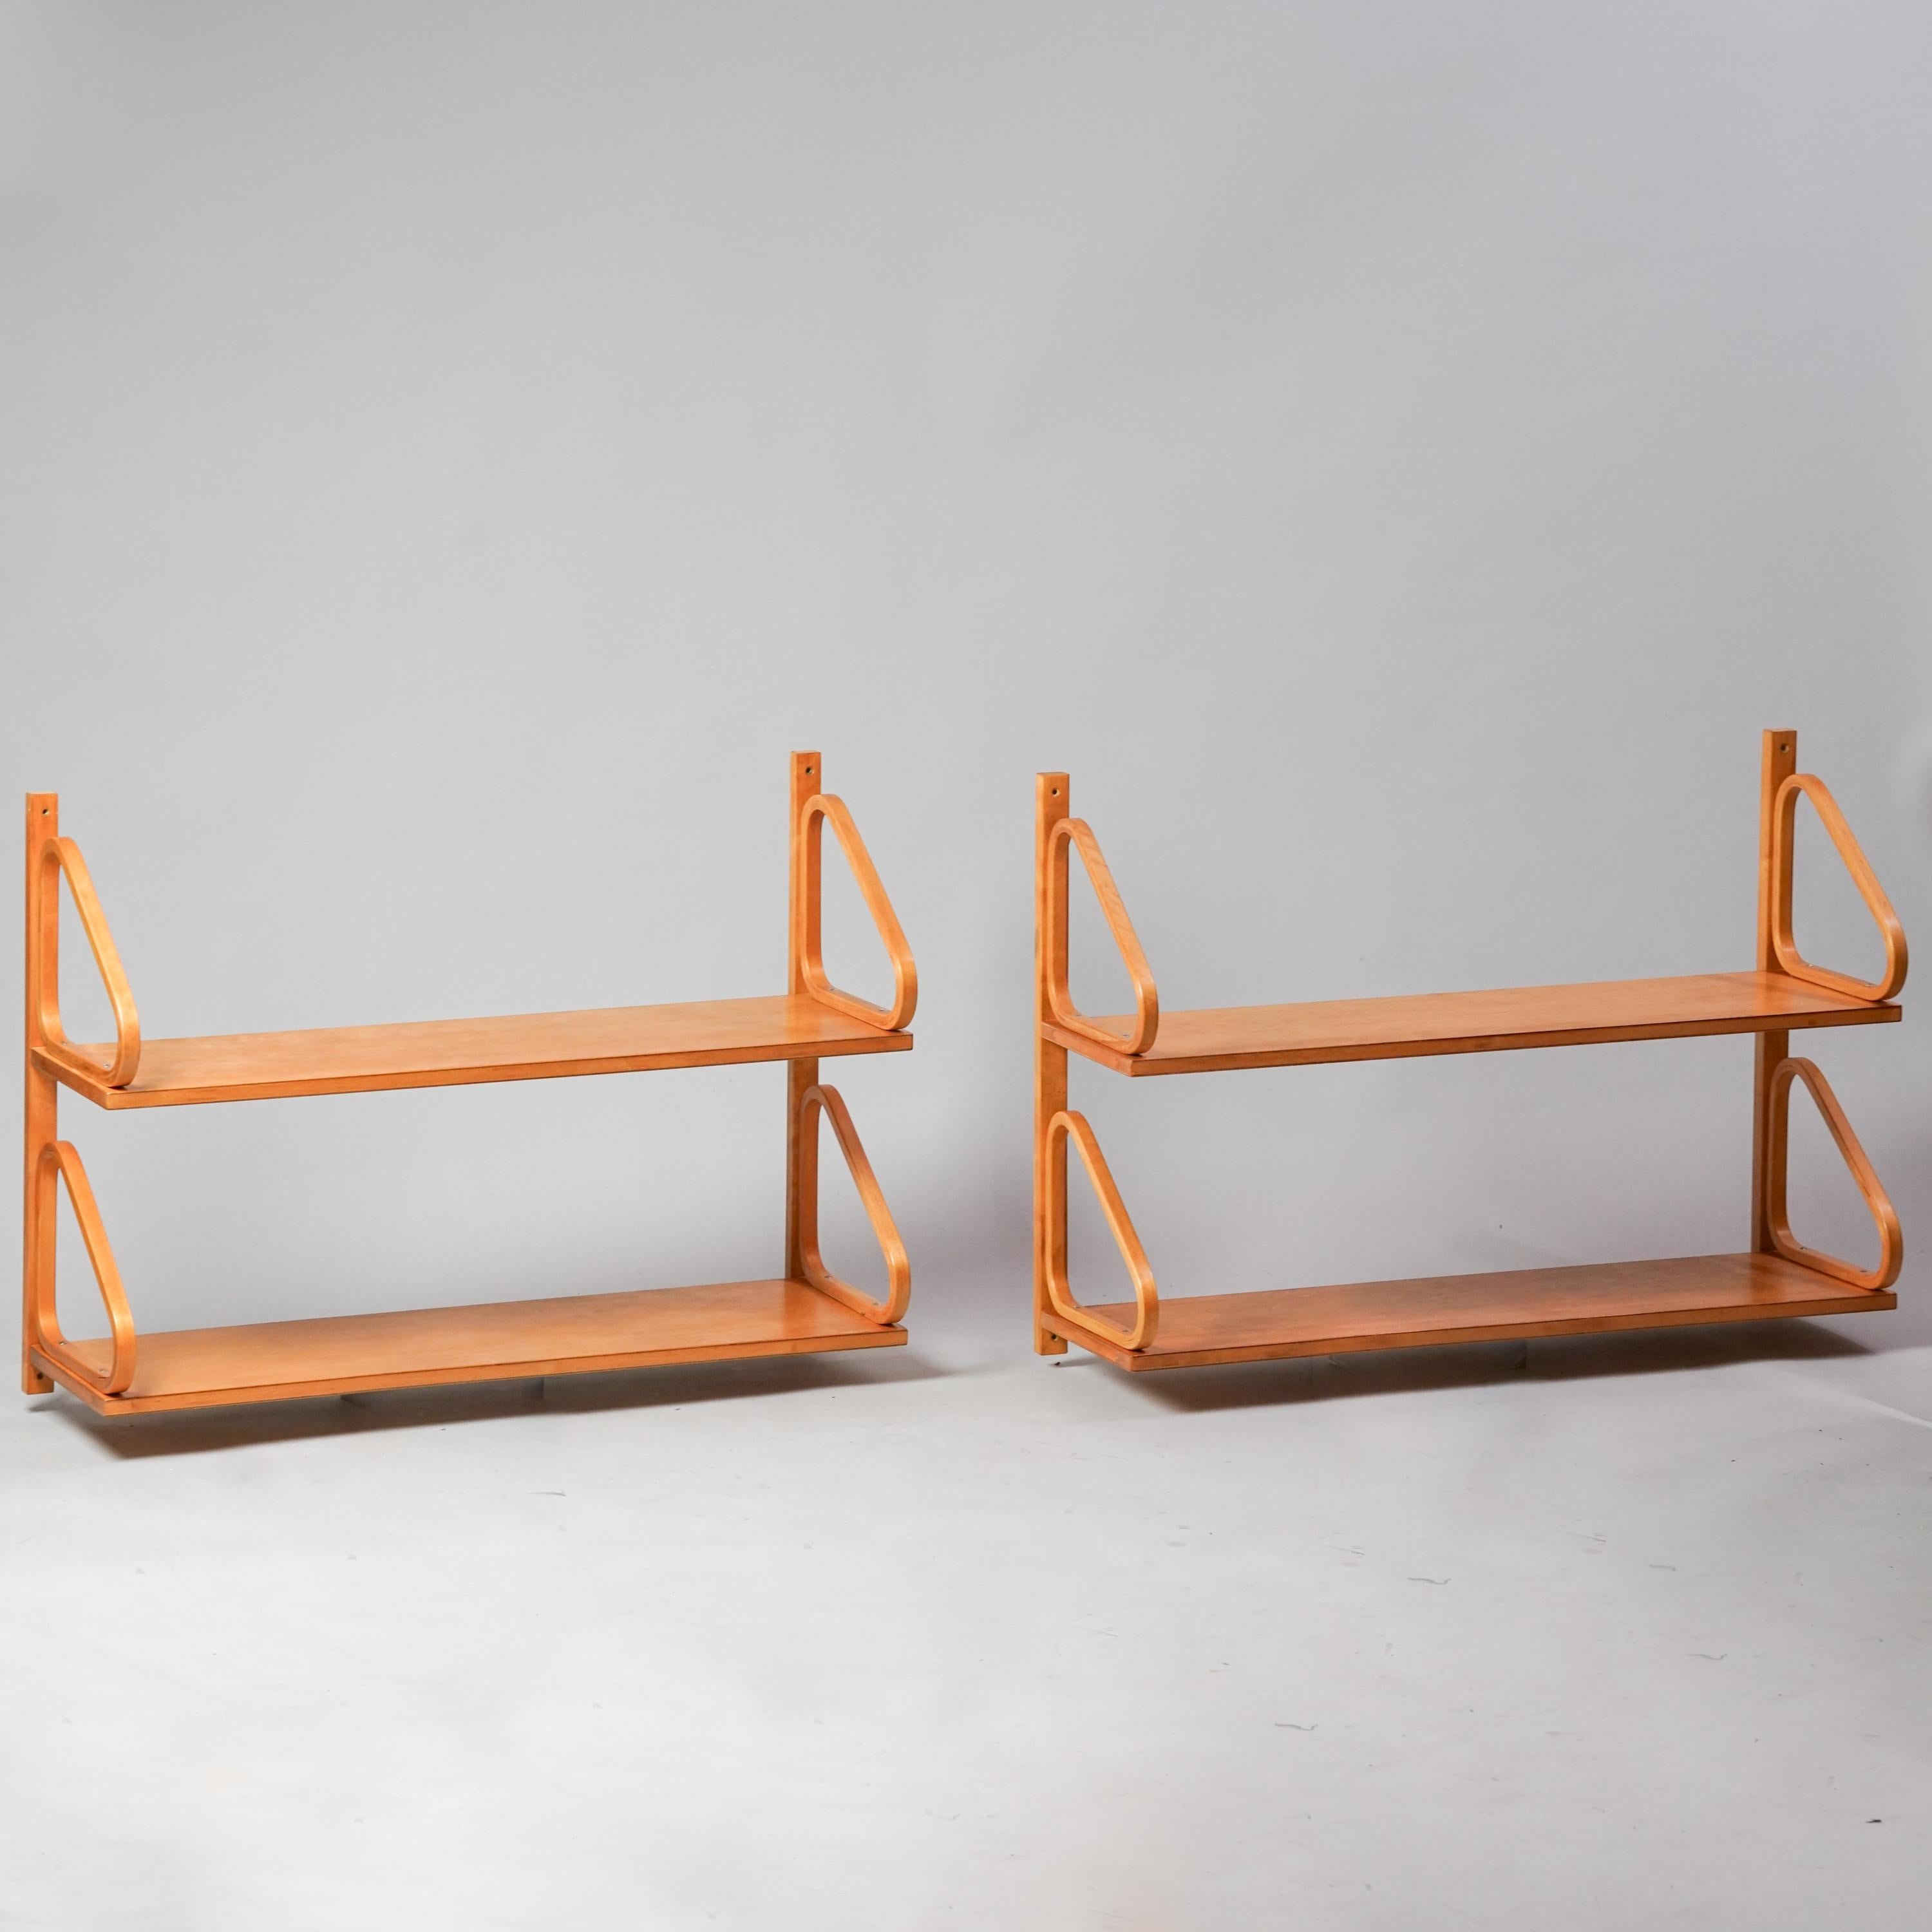 Set of two wall shelves model 112B-2 designed by Alvar Aalto, manufactured by Oy Huonekalu- ja Rakennustyötehdas Ab, 1930s. Birch. Good vintage condition, beautiful patina consistent with age and use. The shelves are sold as a set. Iconic well-known